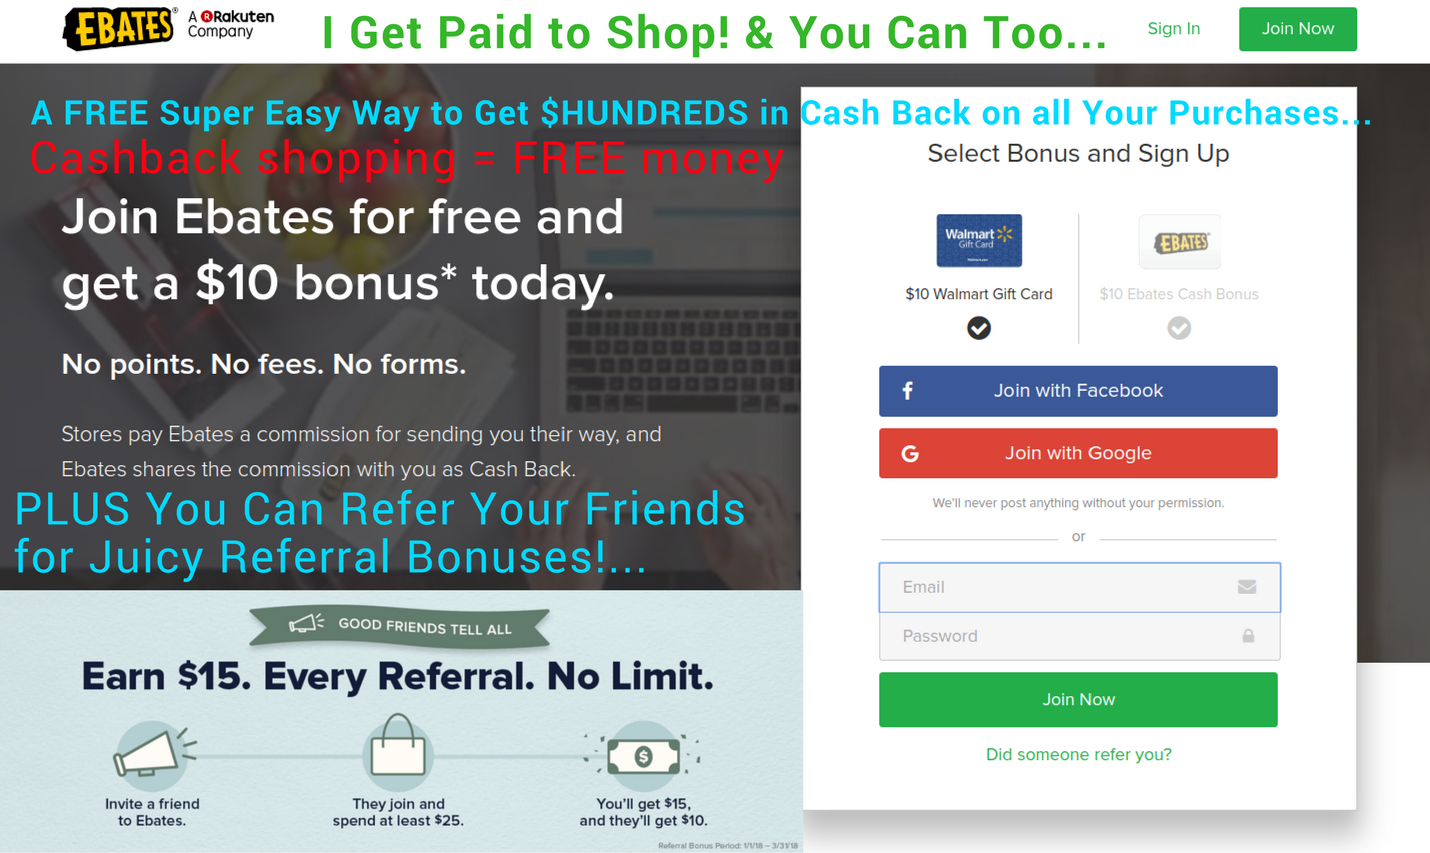 Super easy way to earn cash back on all your purchases with world's number 1 cashback shopping site